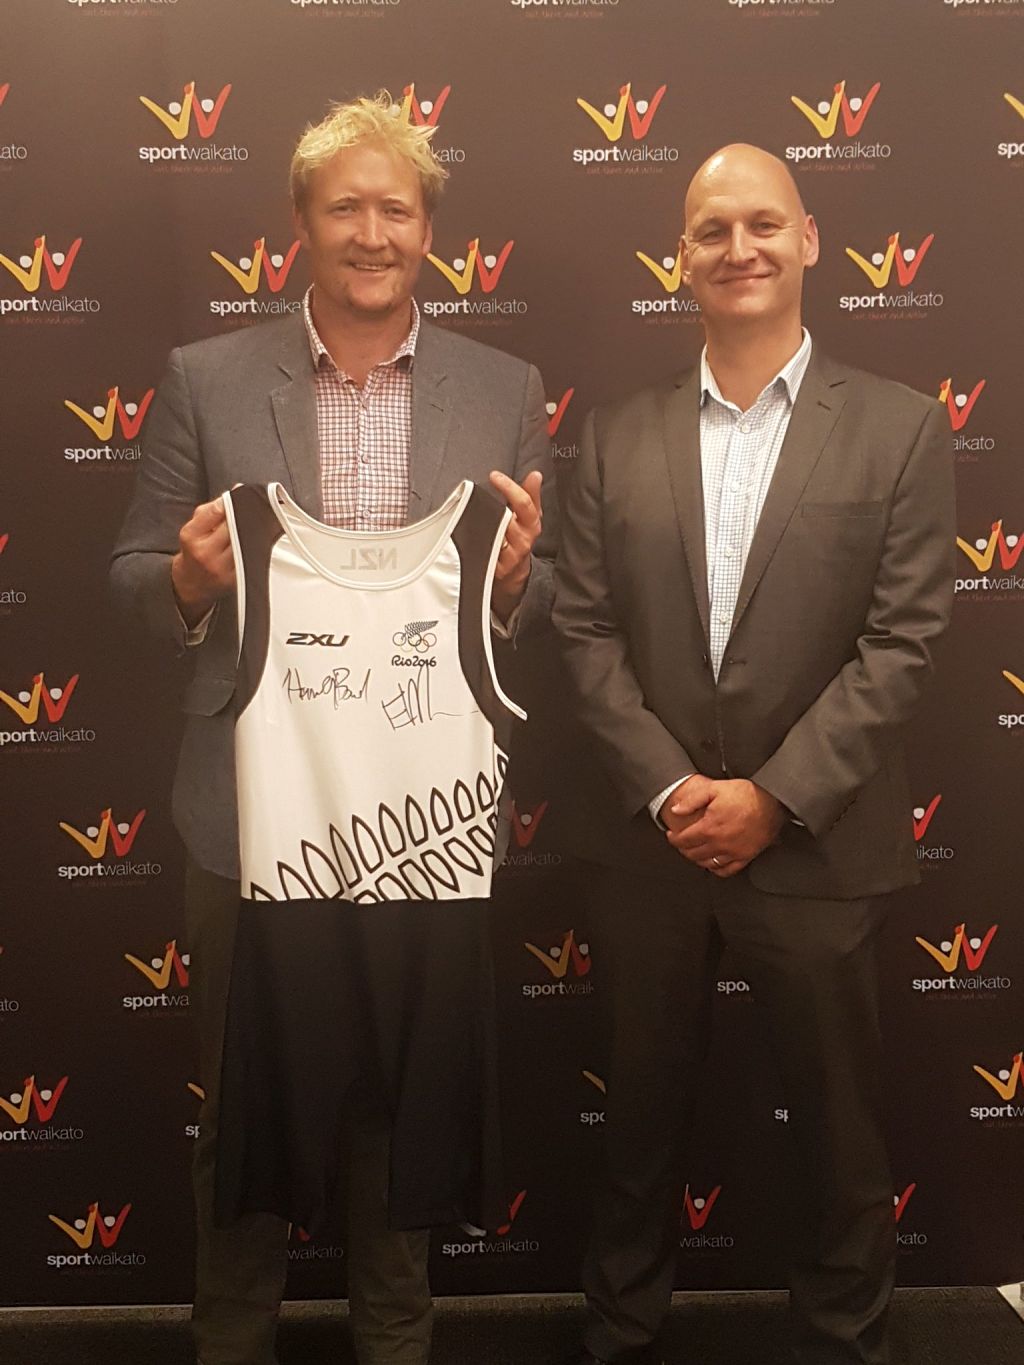 New Zealand rowing legend Eric Murray (left) and The Lines Company chief executive Sean Horgan with Murray’s 2016 Rio de Janeiro Olympics rowing suit which is being auctioned on Trade Me to raise money to buy bikes for deserving kids this Christmas.